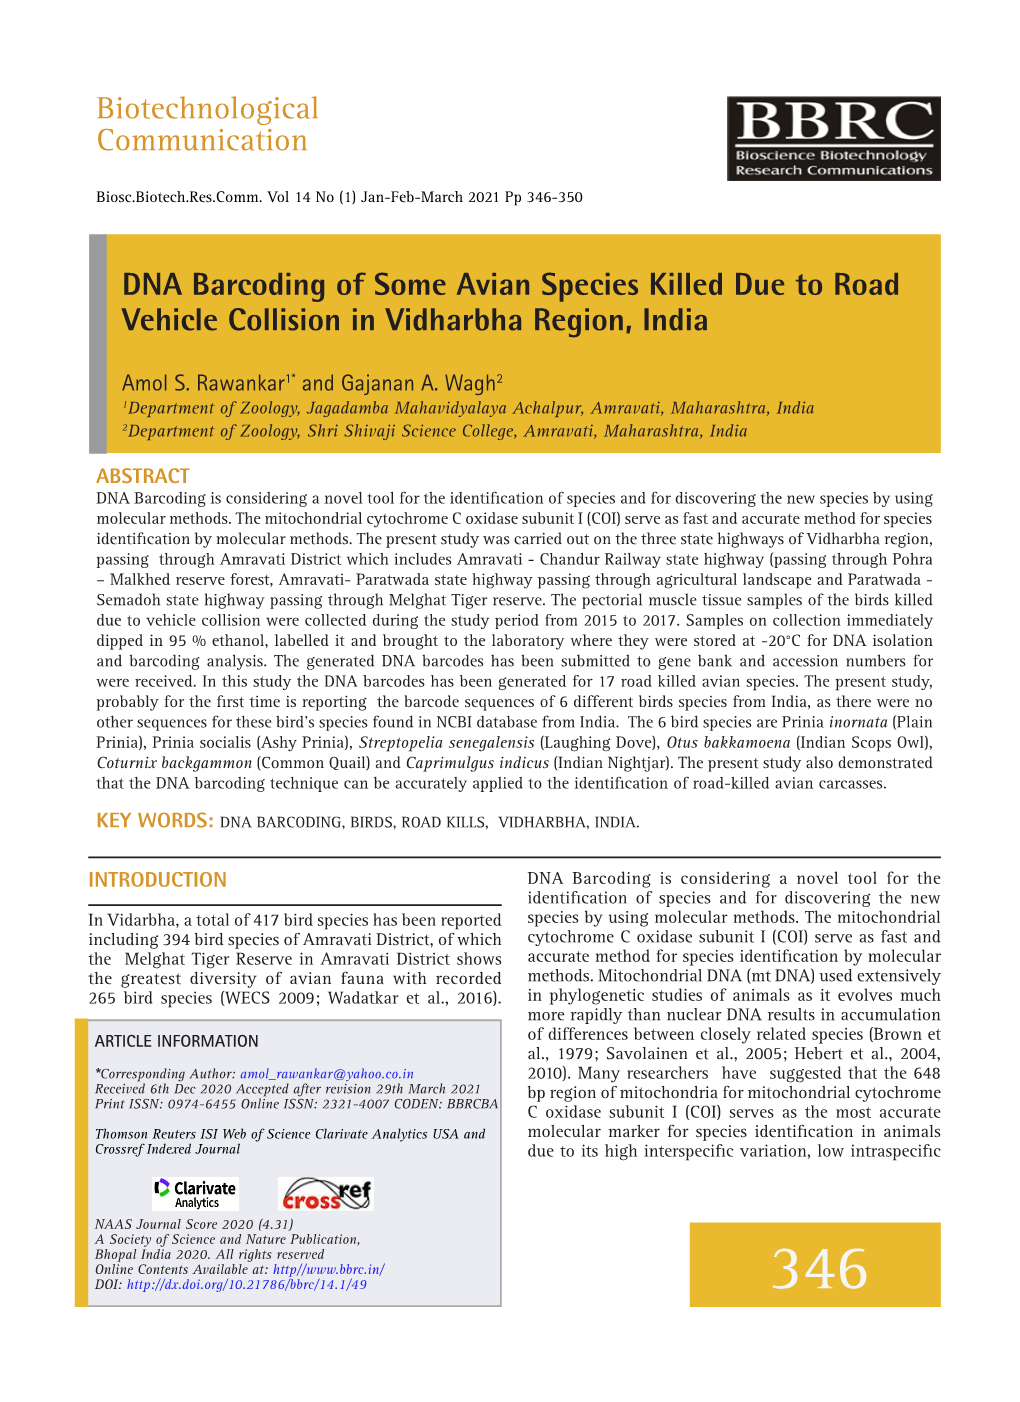 DNA Barcoding of Some Avian Species Killed Due to Road Vehicle Collision in Vidharbha Region, India